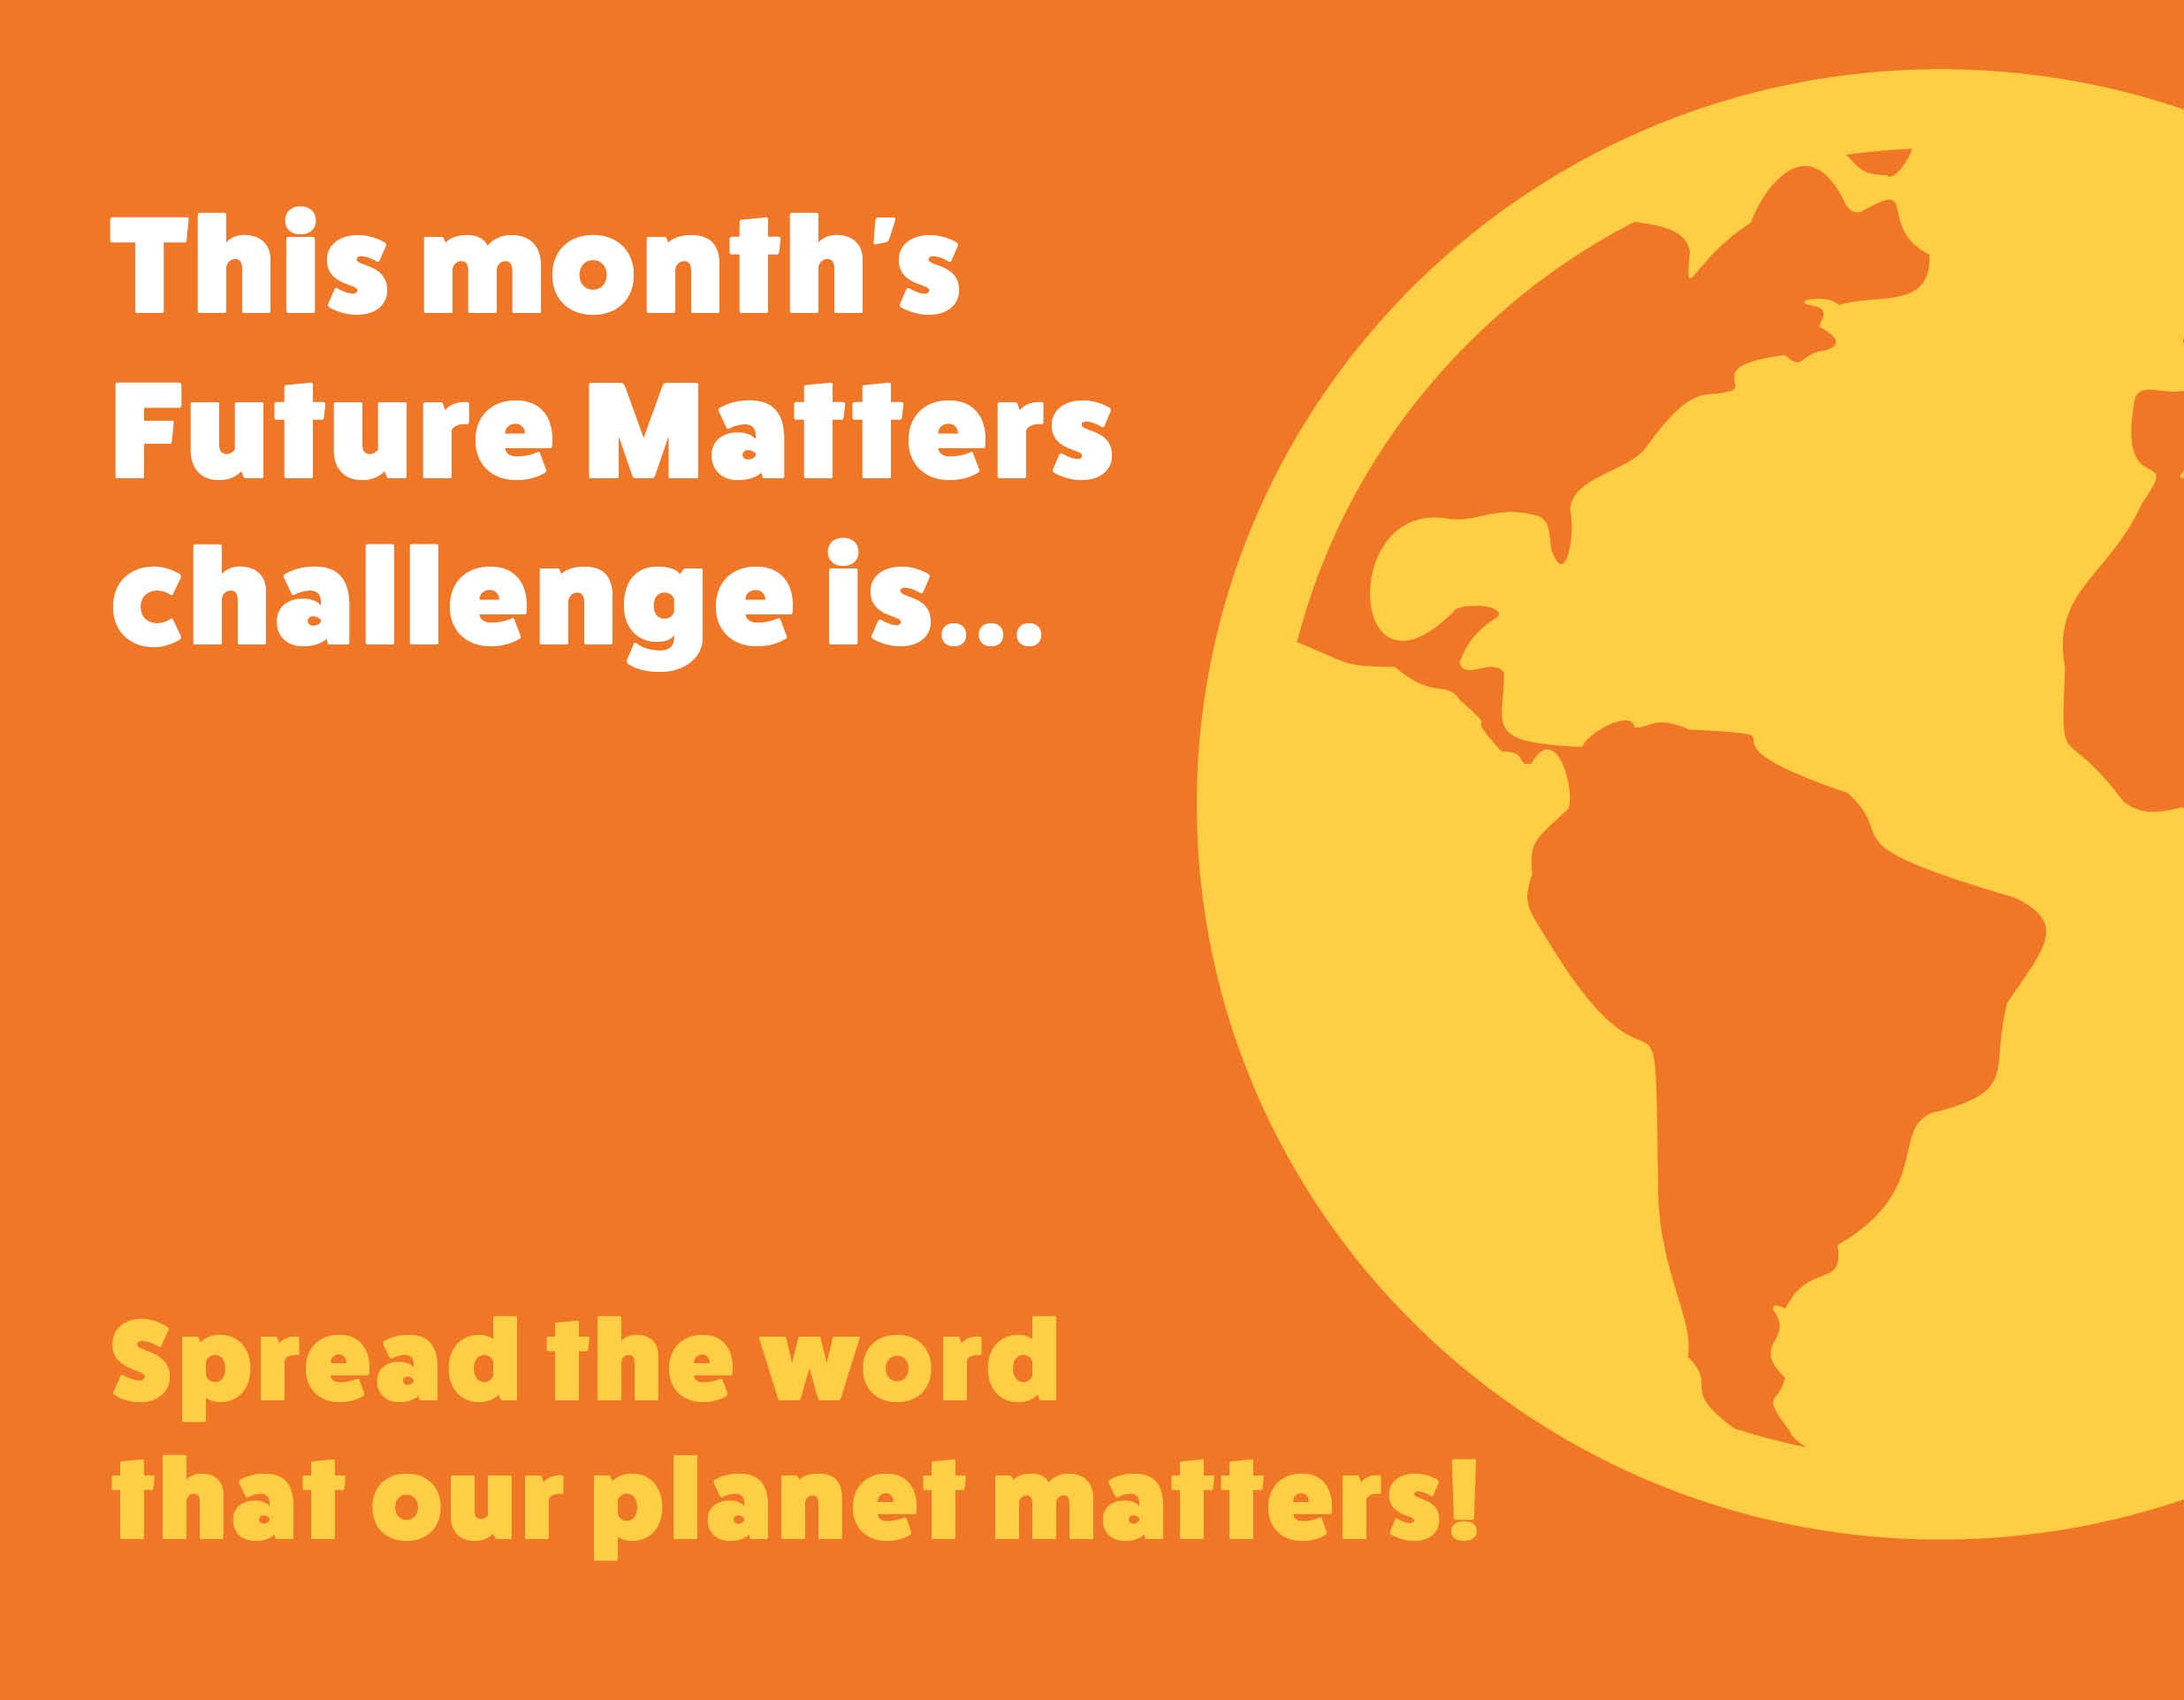 This month's future matters challenge is... spread the word that our planet matters